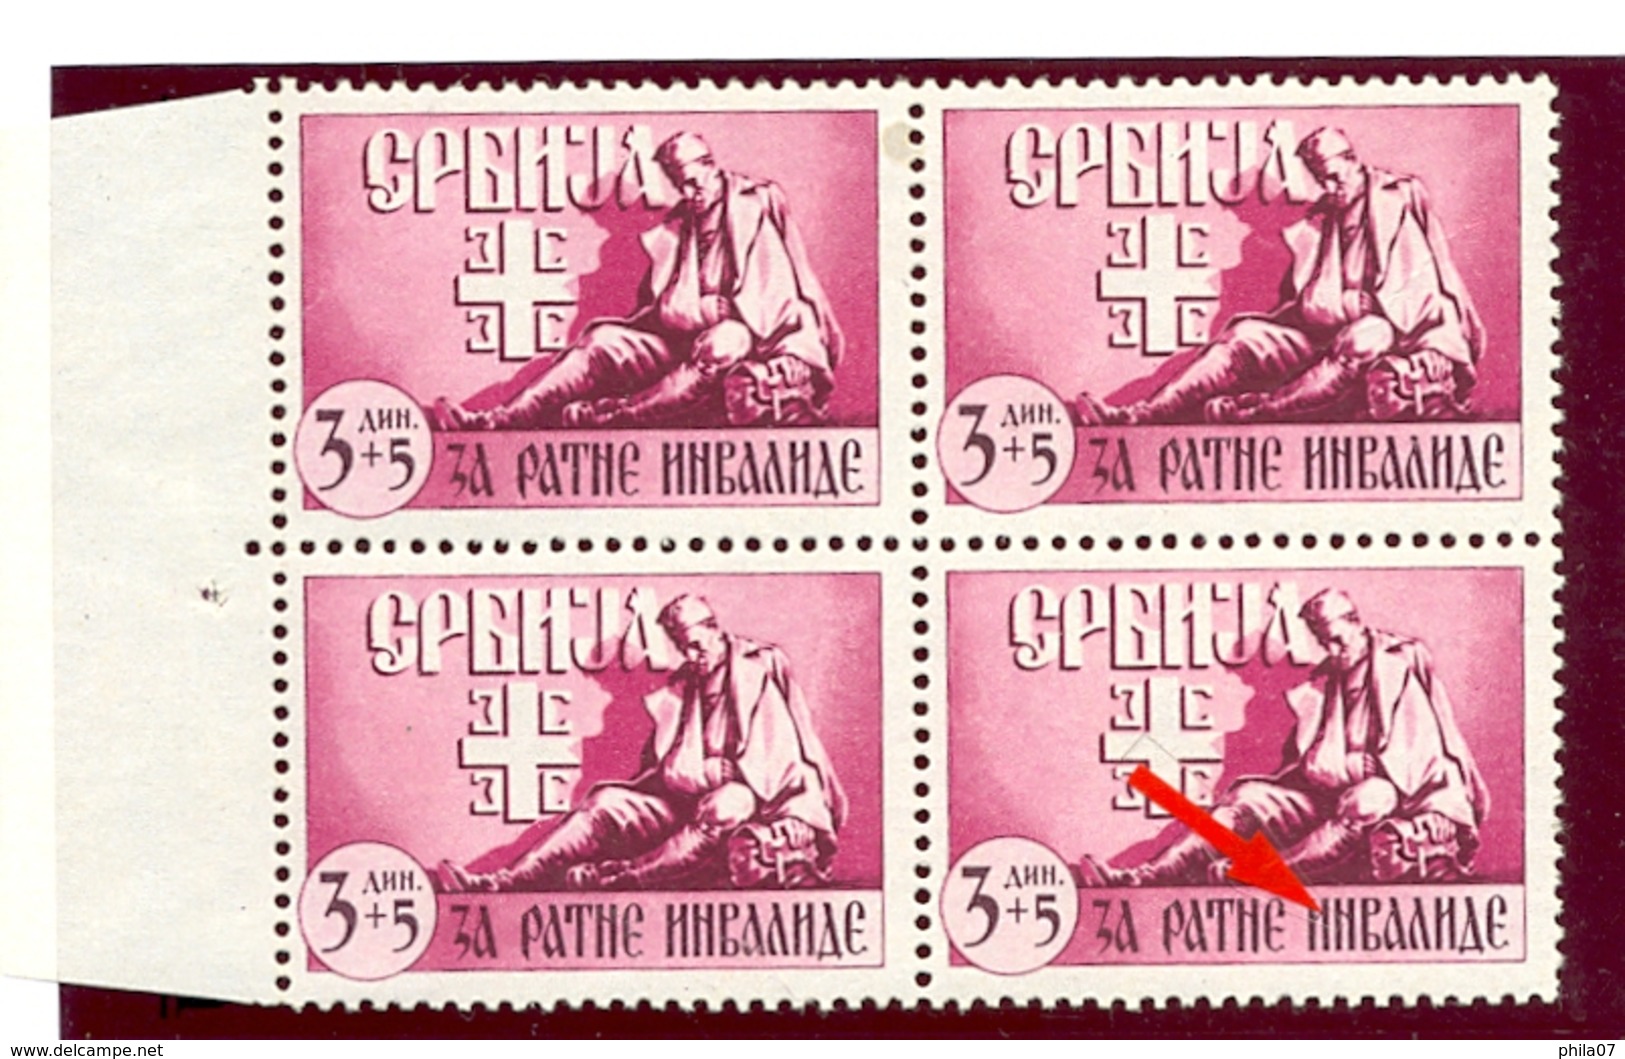 Serbia - Mi.No. 86/89 In Block Of 4 And Stamp No. 8 With Error Of Print, Broken I In INVALIDE. - Serbie